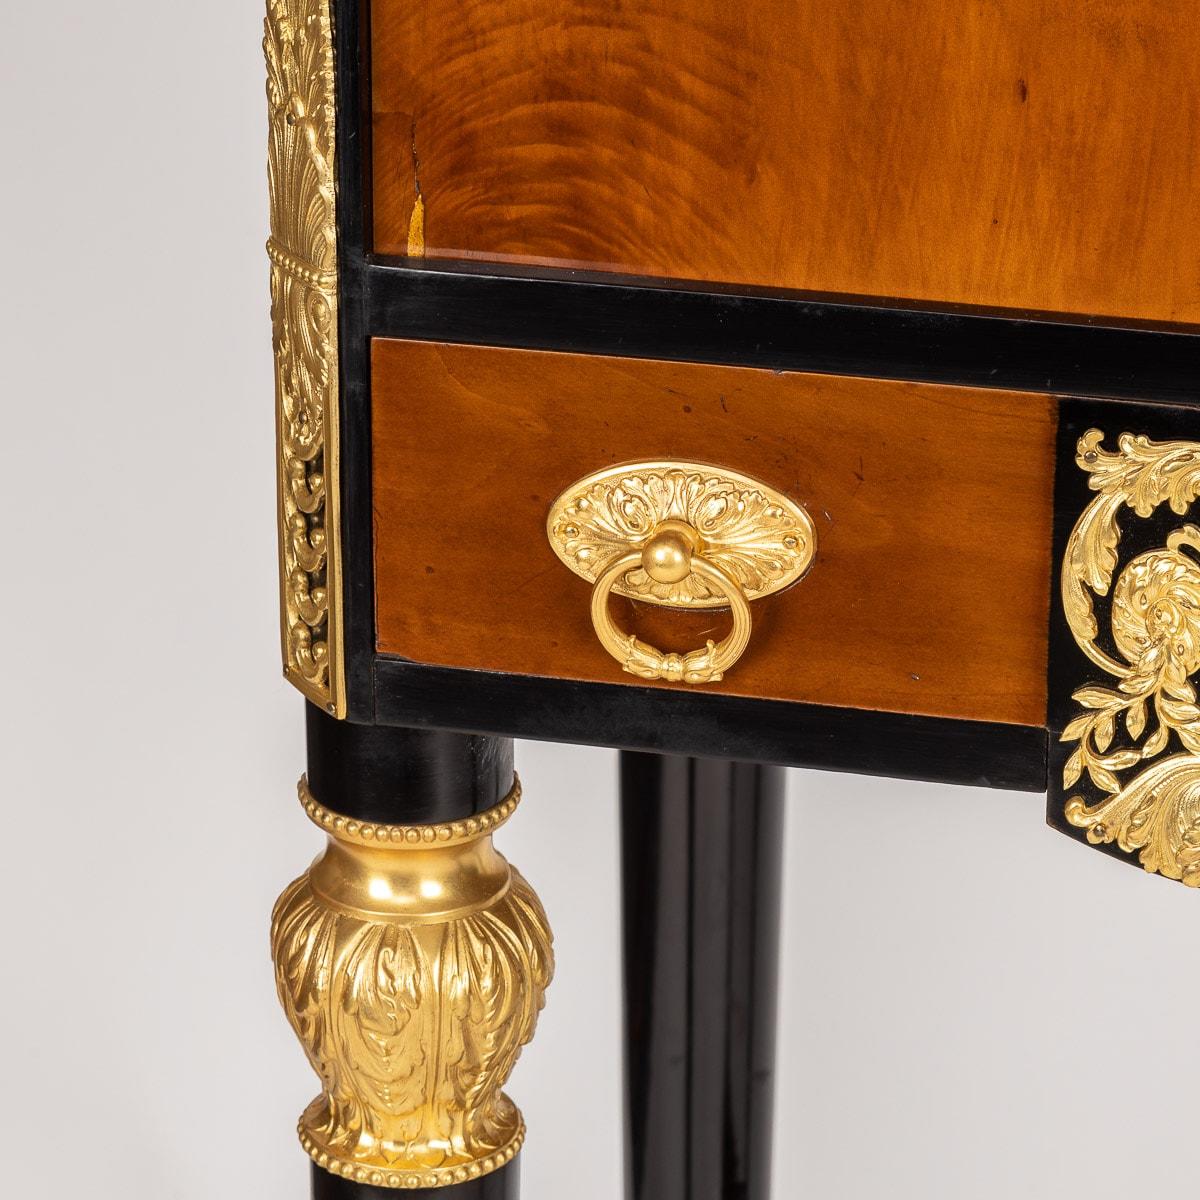 20th Century French Louis XVI Style Ormolu Cutlery Cabinet, c.1900 For Sale 3